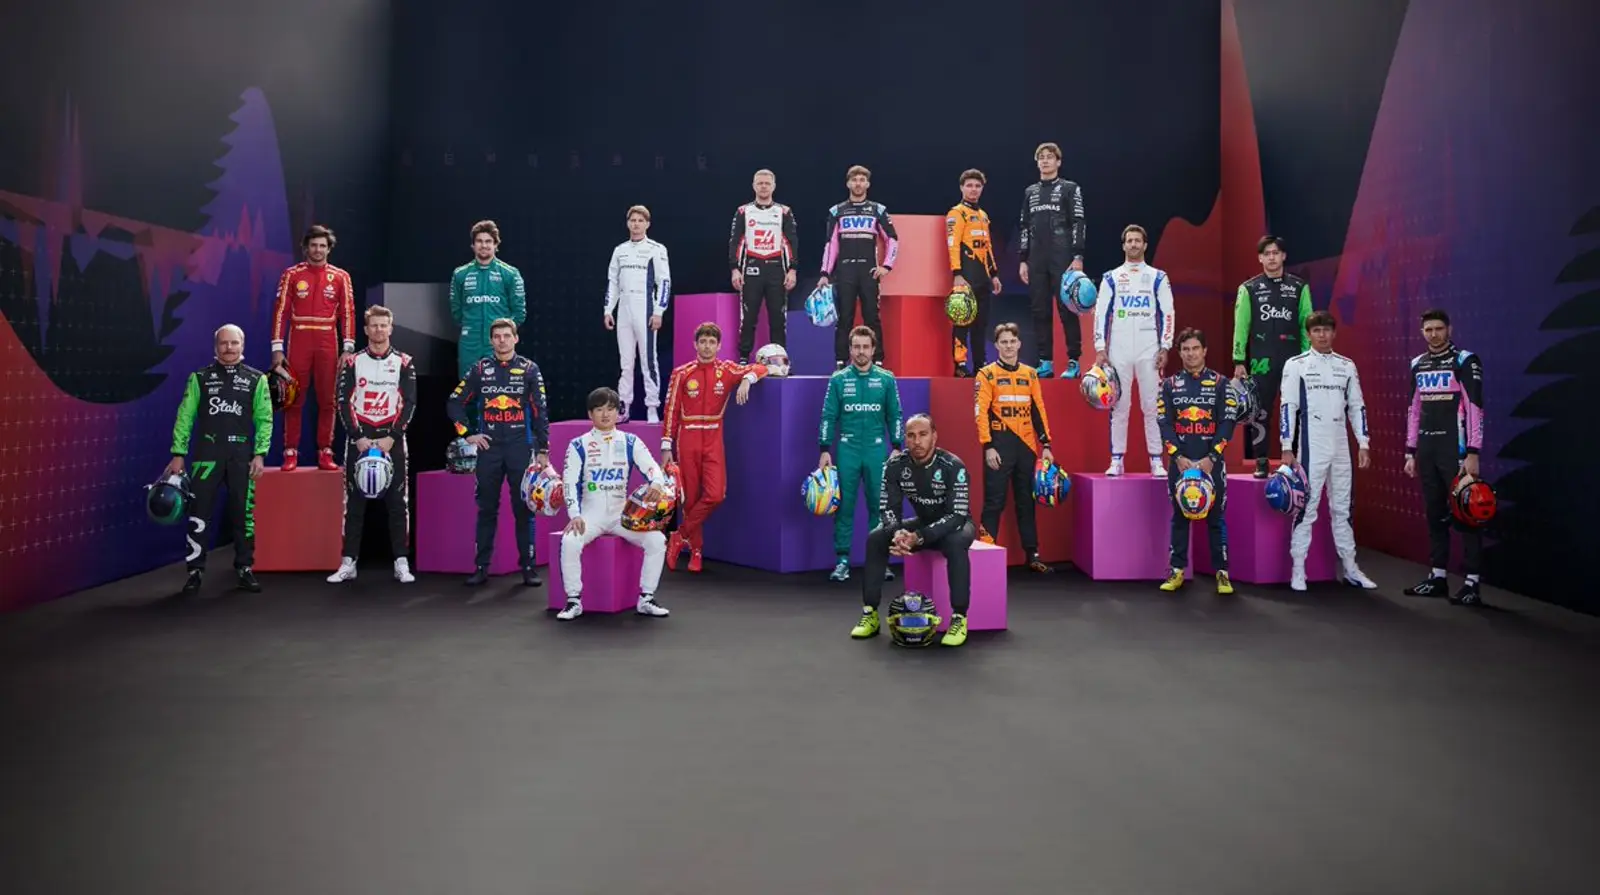 A group photo of all 20 drivers competing in the 2024 Formula 1 season.